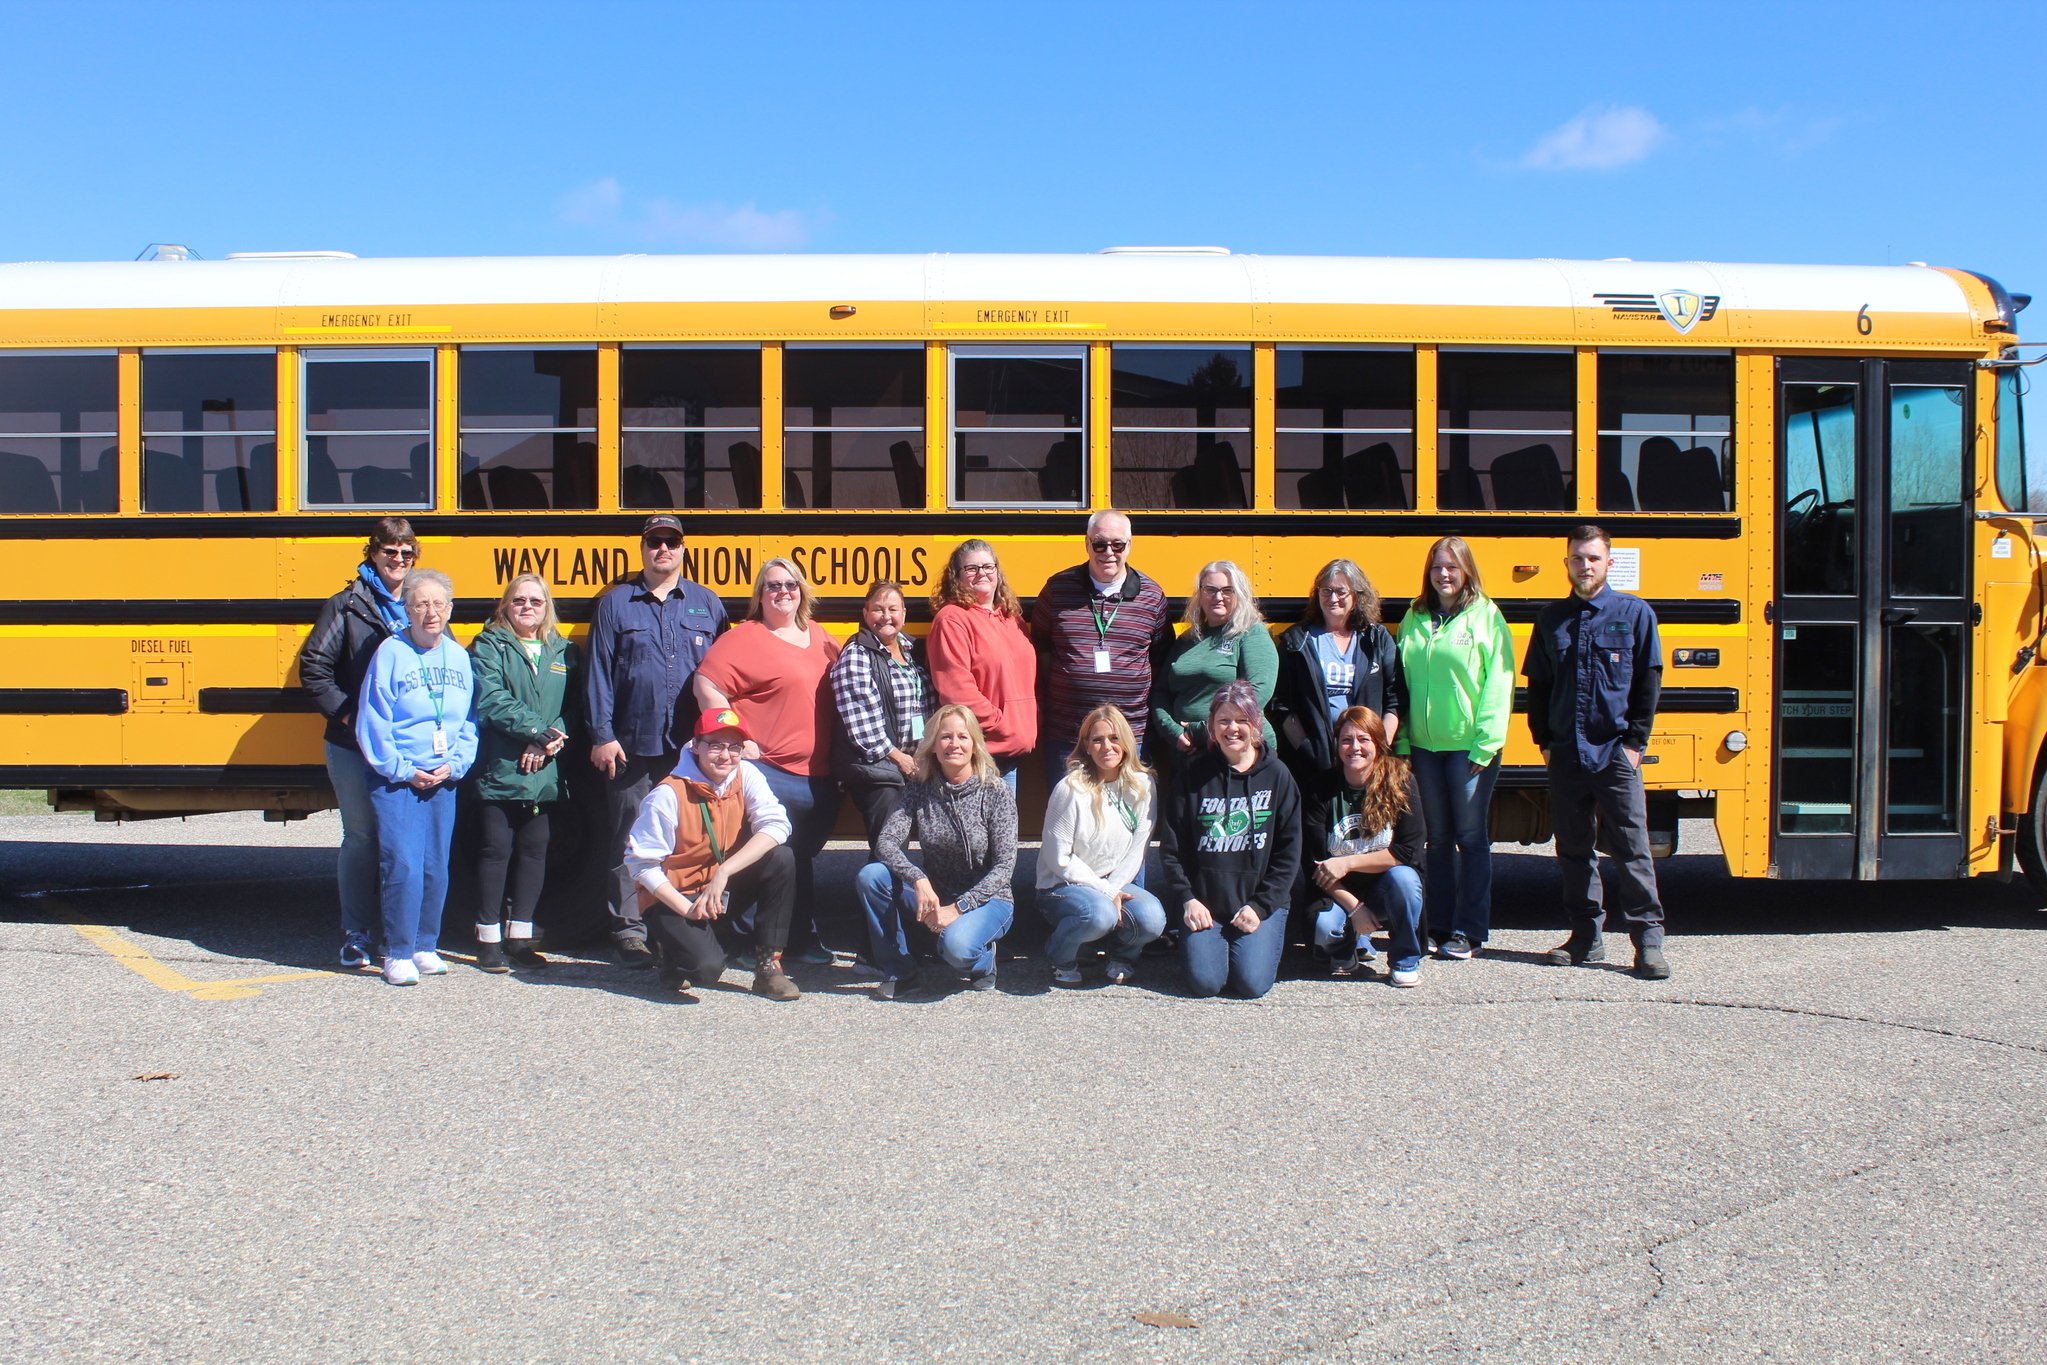 17 Bus Drivers in front of a Wayland Union School Bus